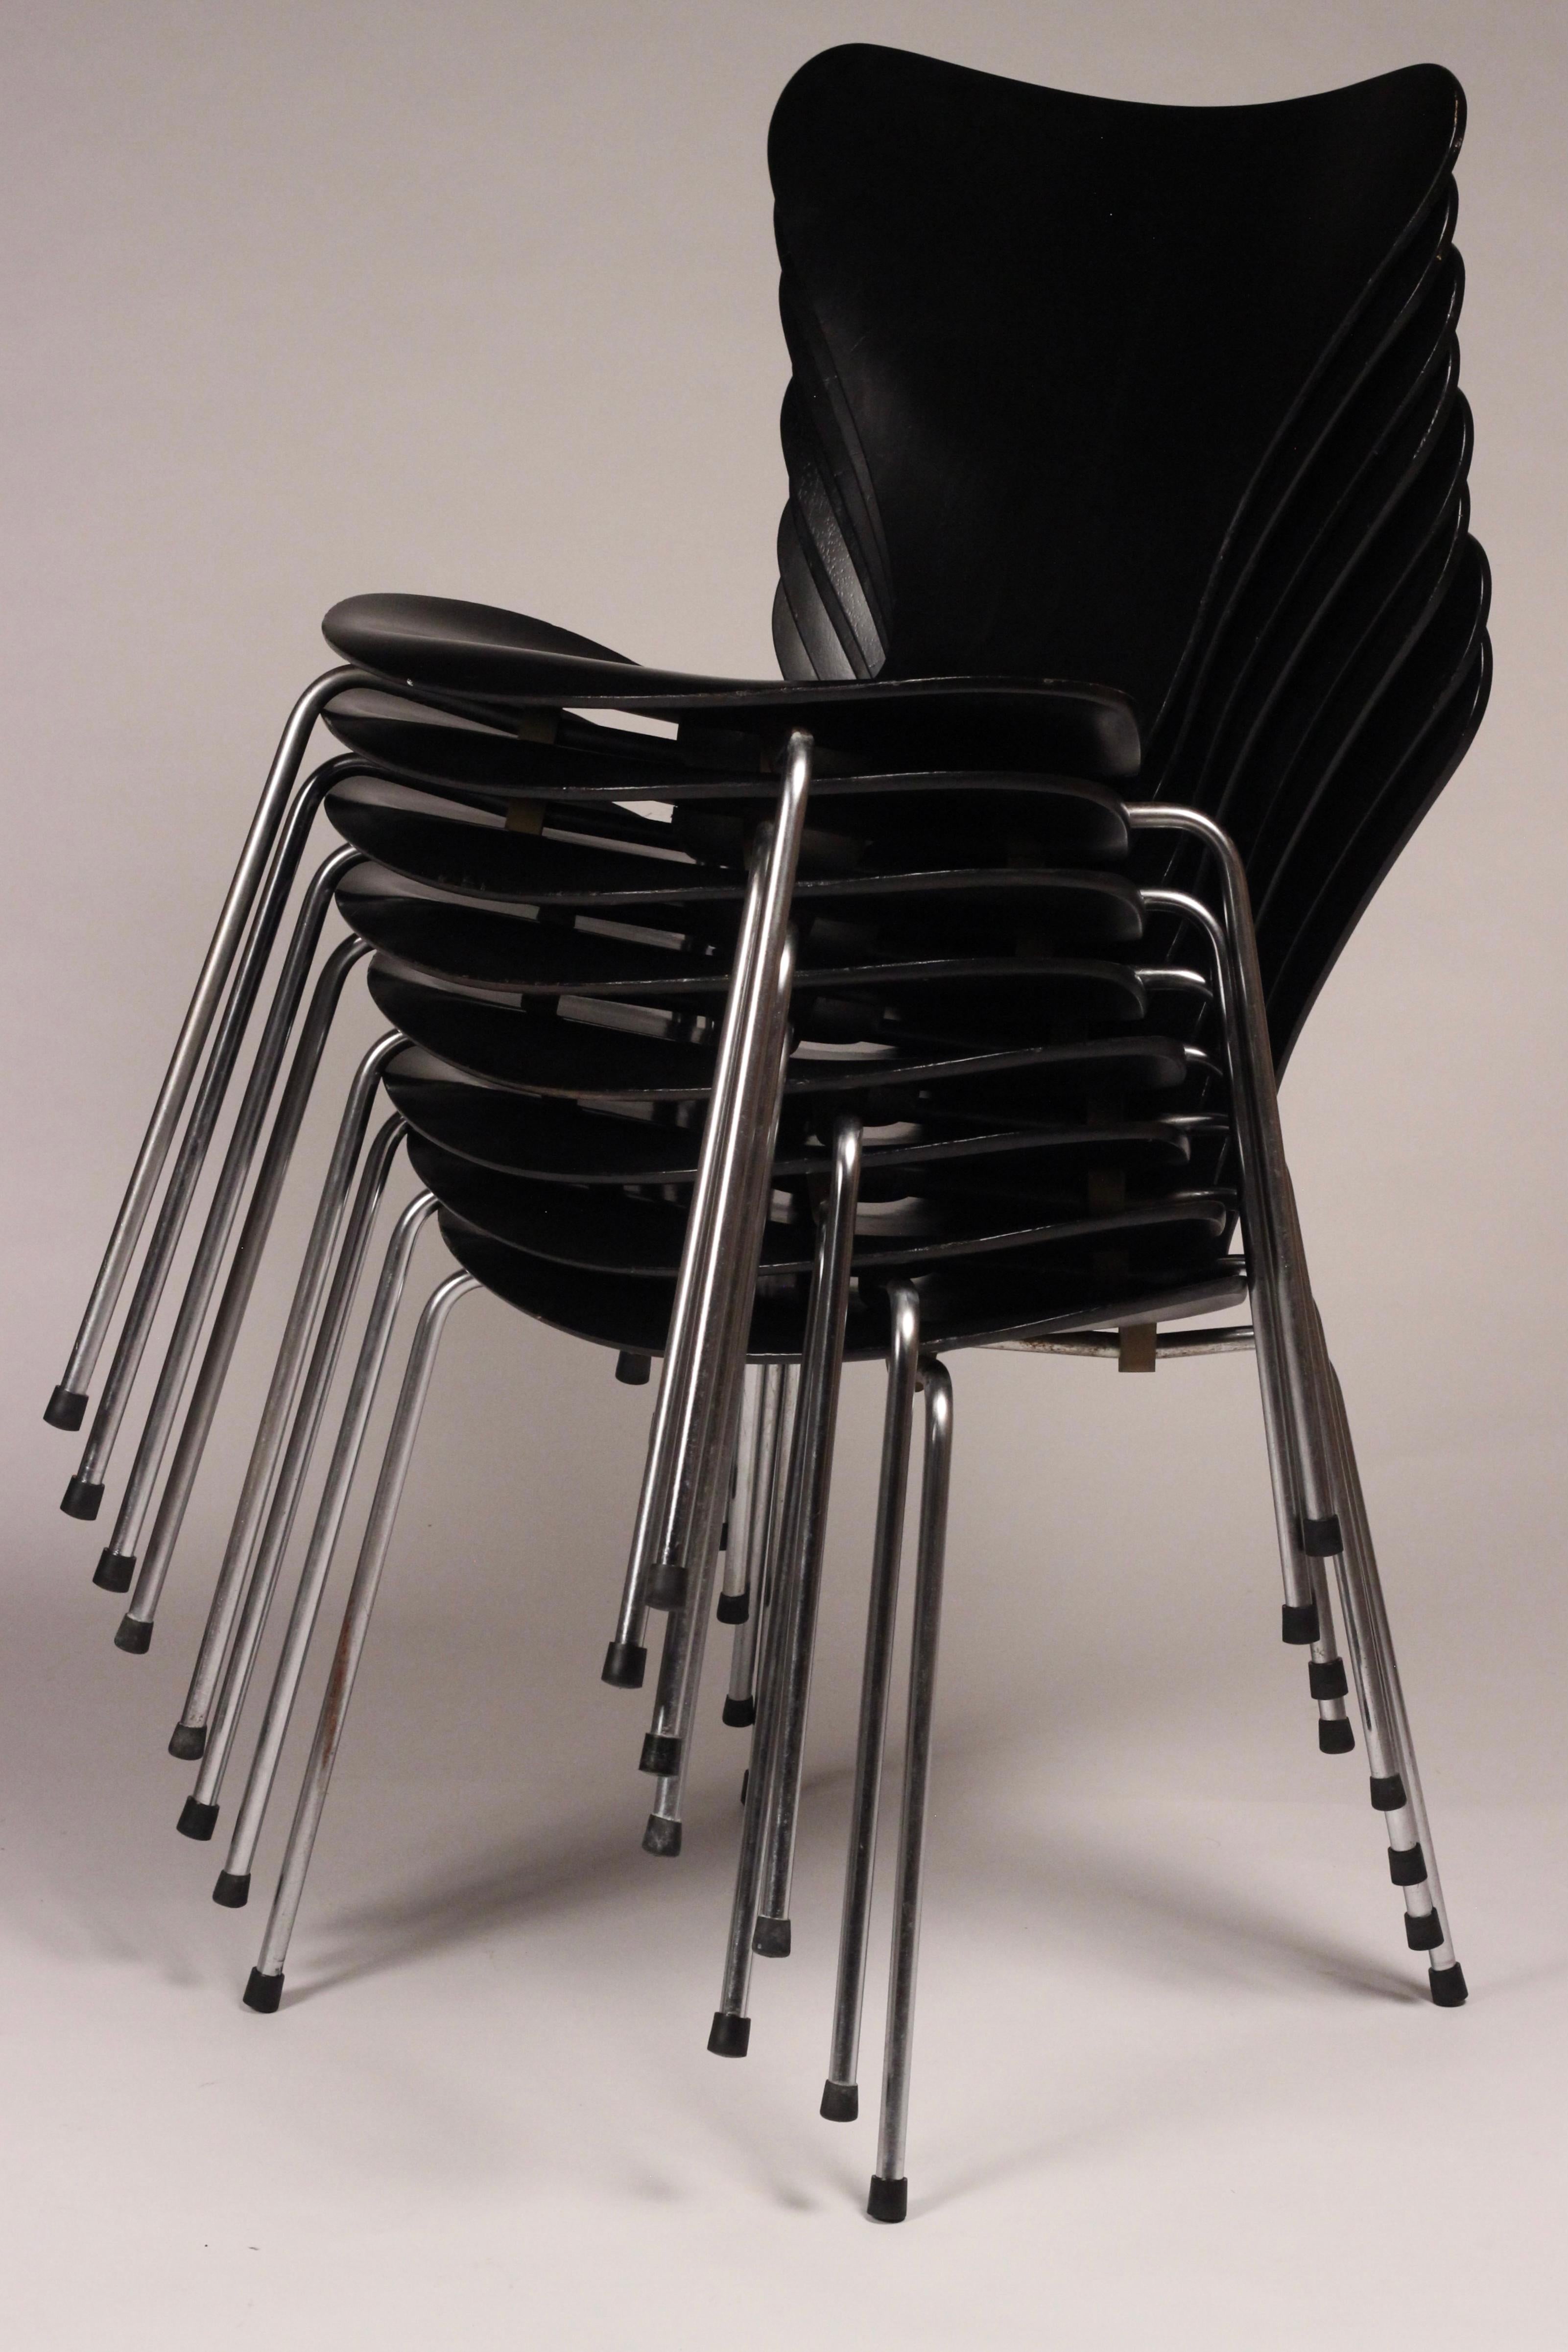 Arne Jacobsen Series 7 or 3107 Chairs by Fritz Hansen Mid Century Modern 1964 For Sale 4